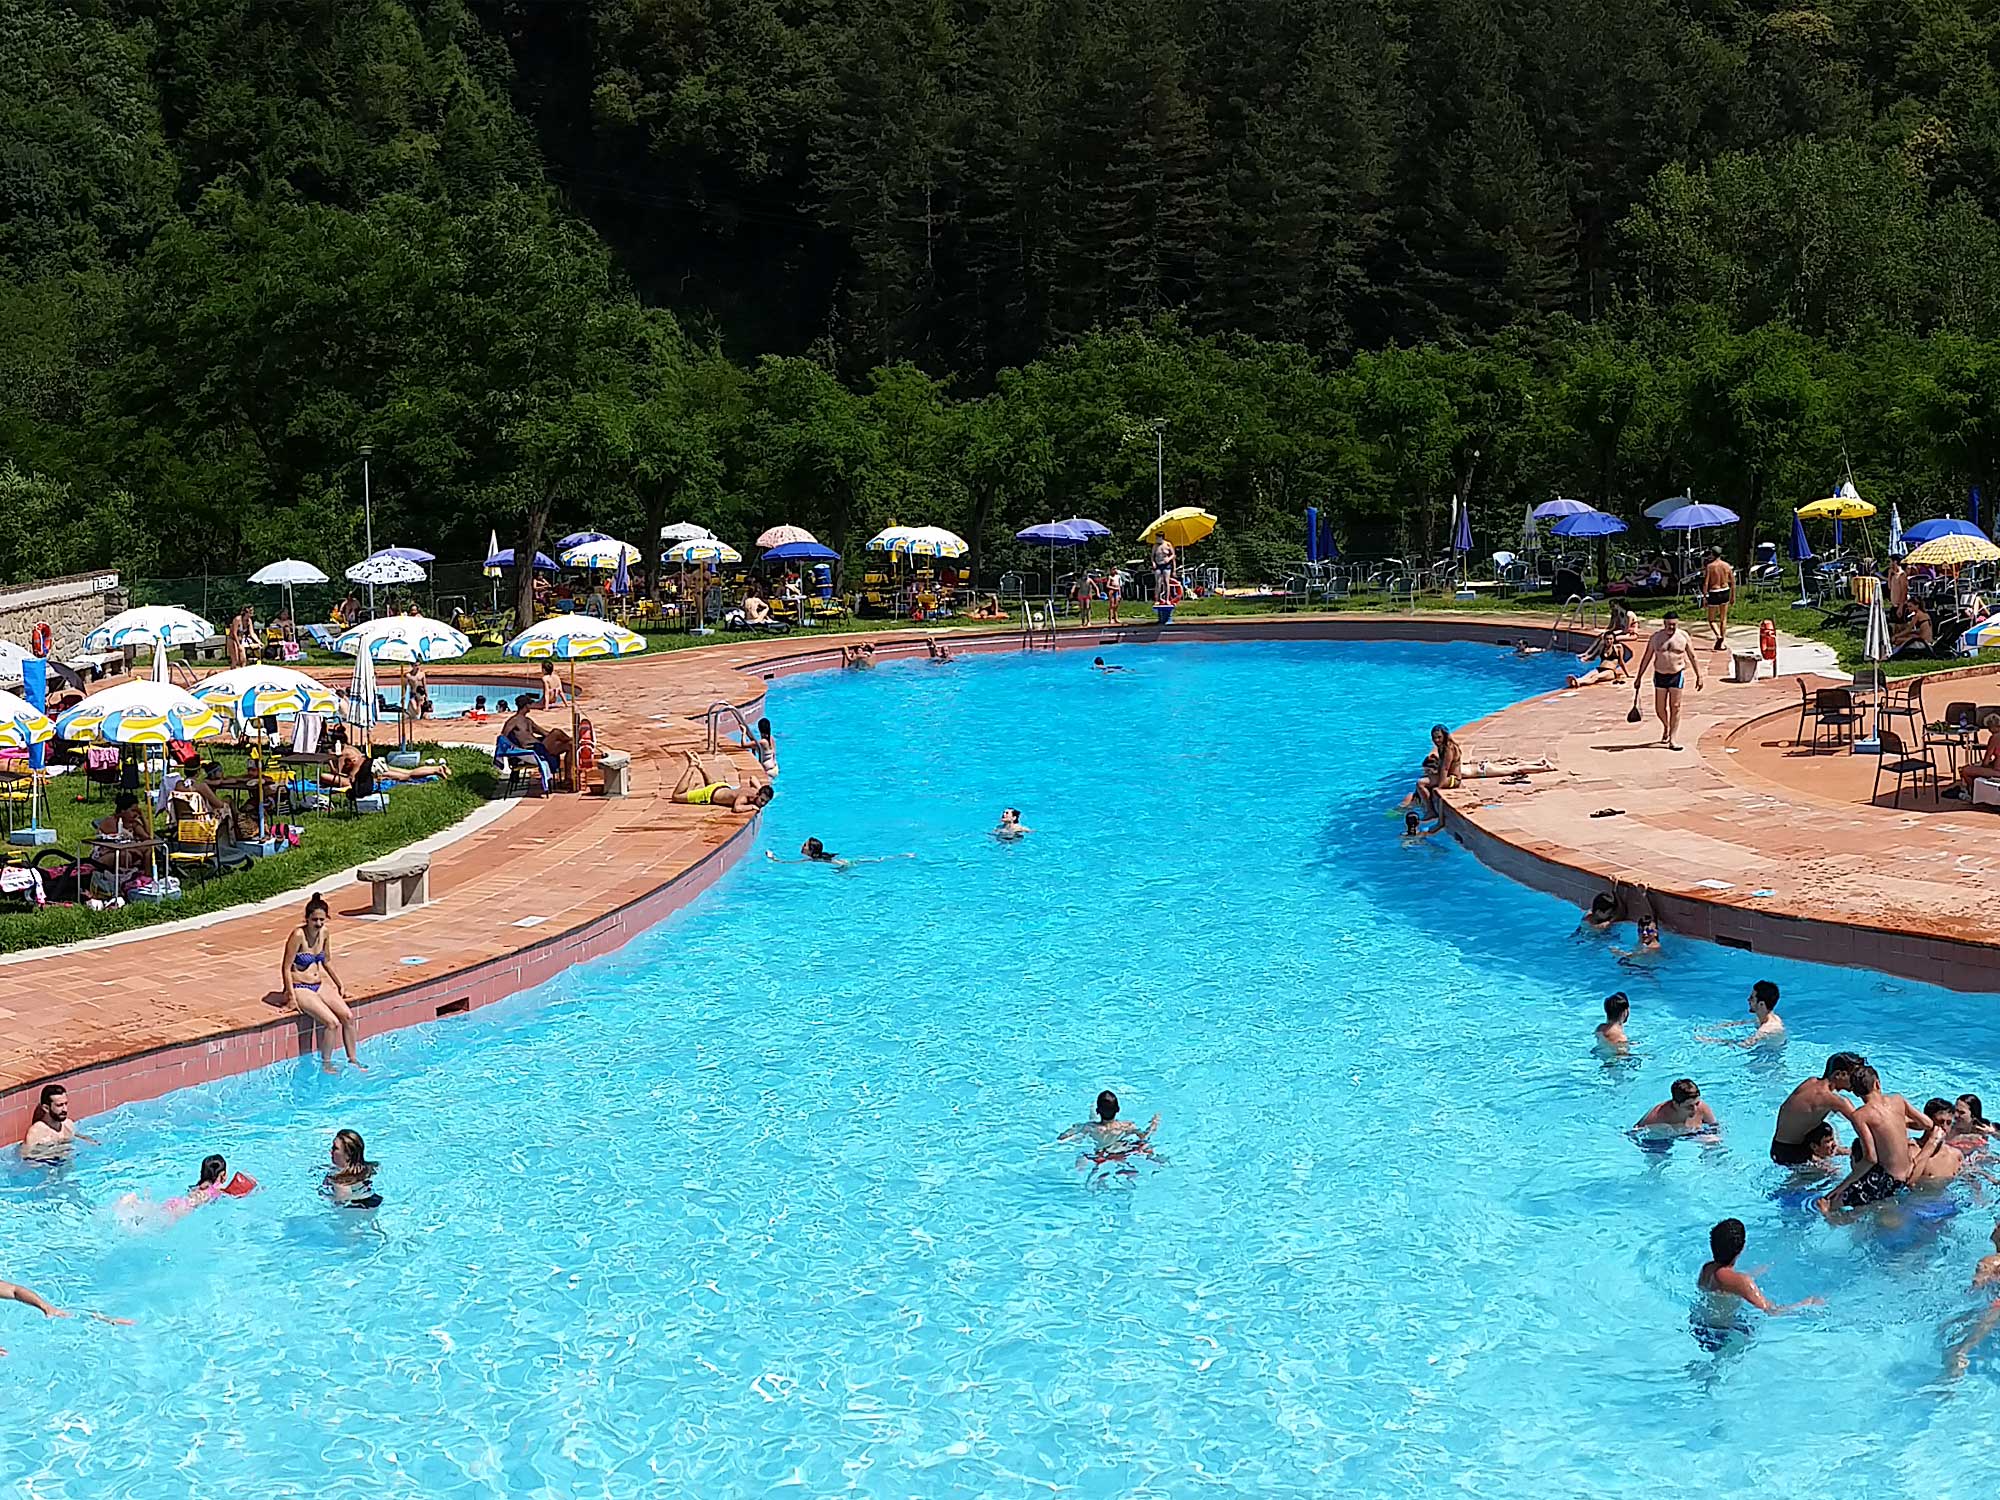 Two large swimming pools surrounded by the greenery of the Mugello